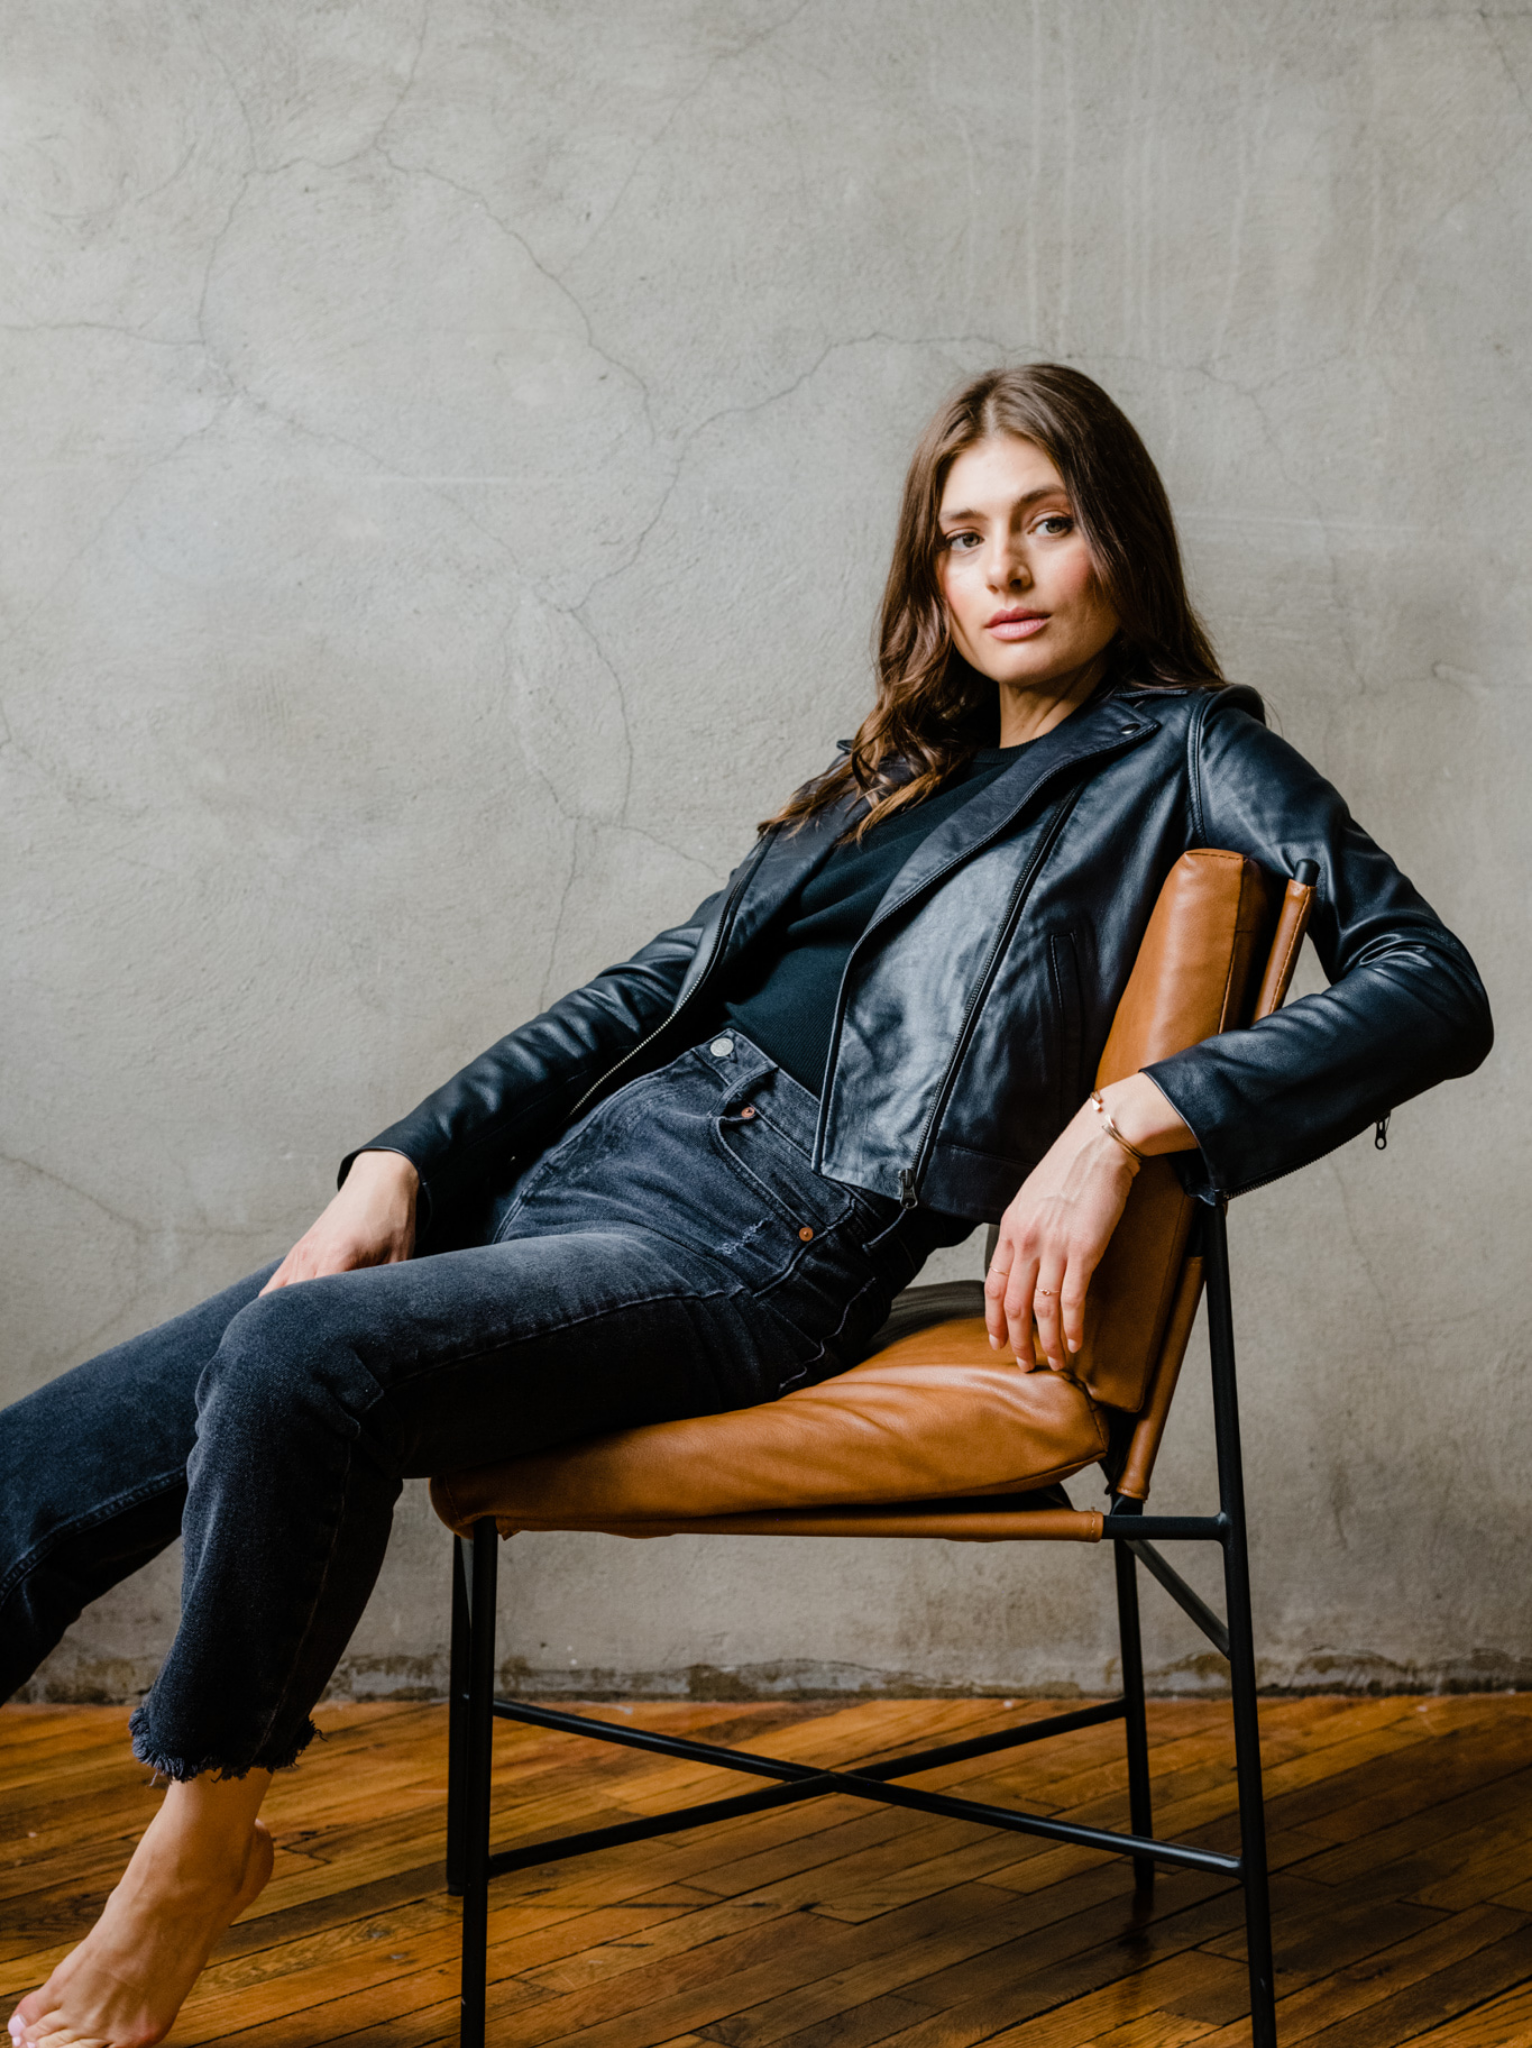 Woman in a leather jacket sitting casually on a chair.